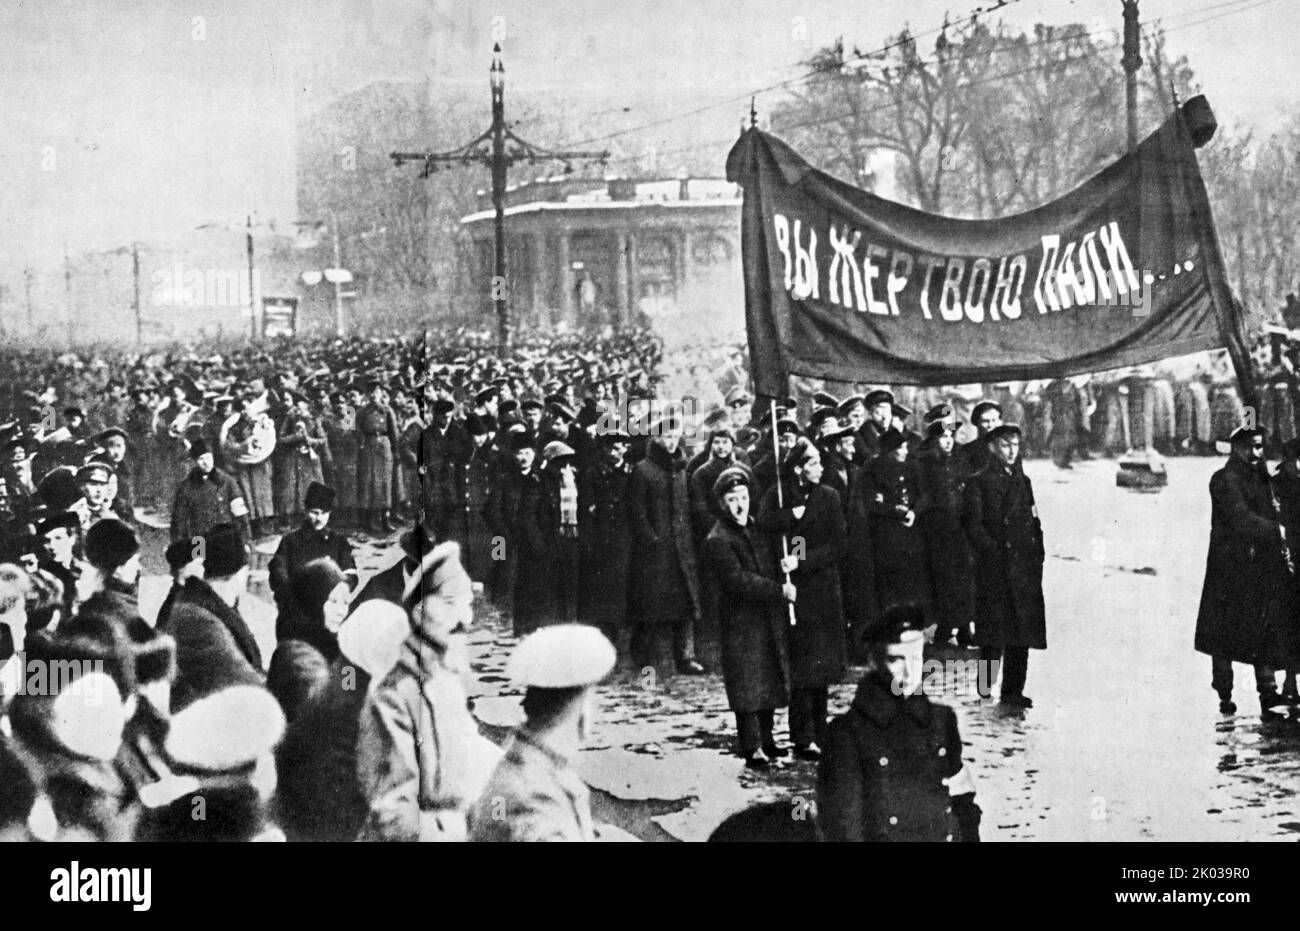 The funeral of the revolutionaries who died in the days of the overthrow of the autocracy. Petrograd, March 1917. Stock Photo